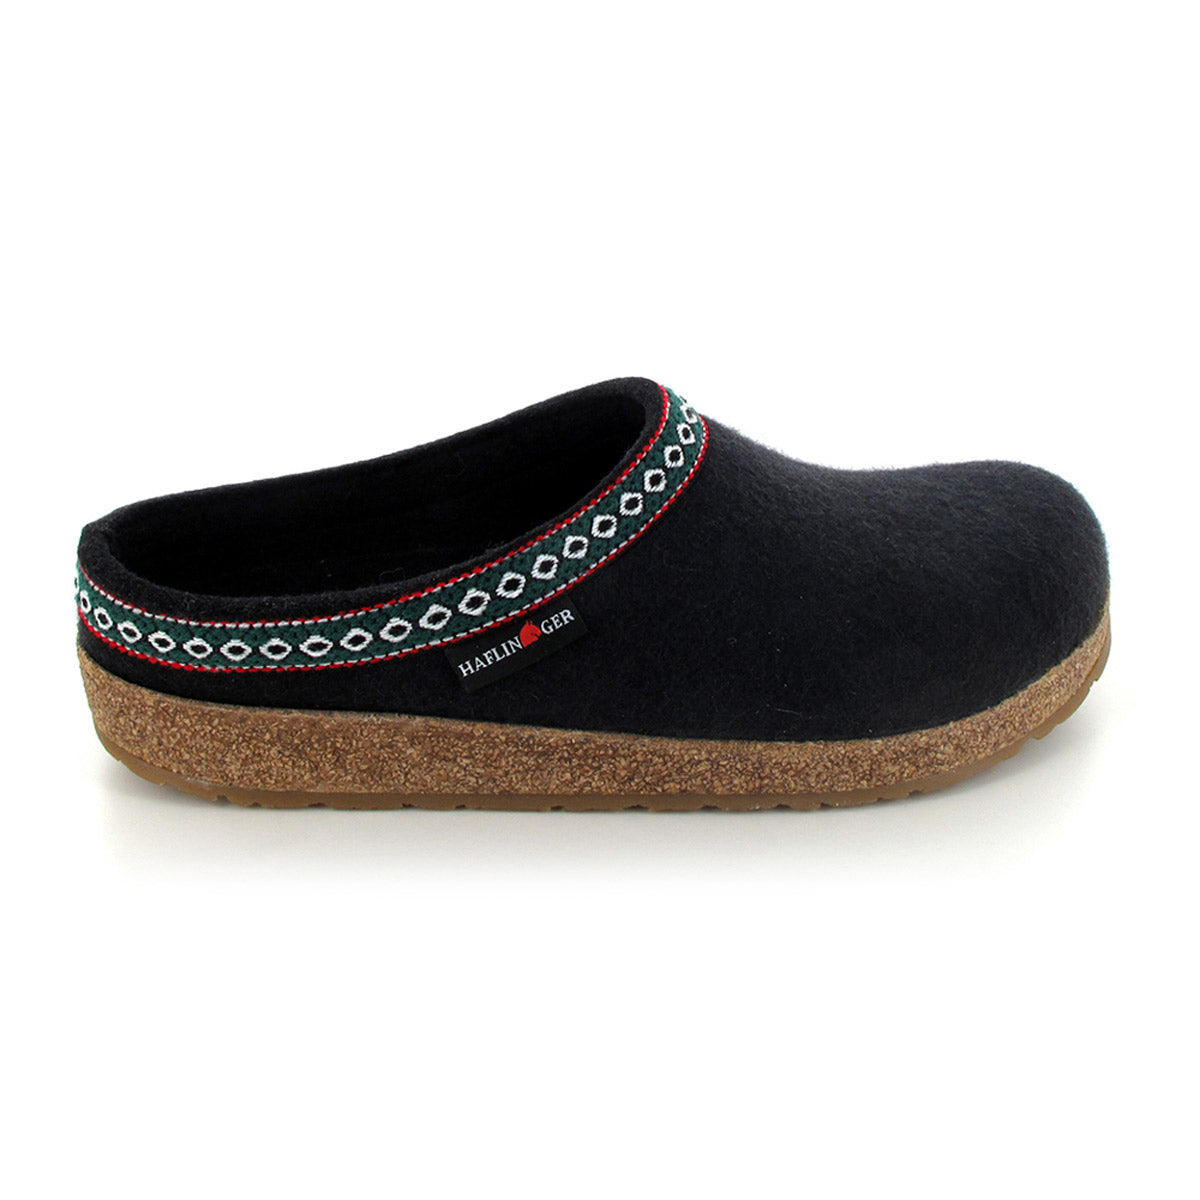 A single black Haflingers GZ Black clog with decorative stitching and a wool felt upper on a white background.